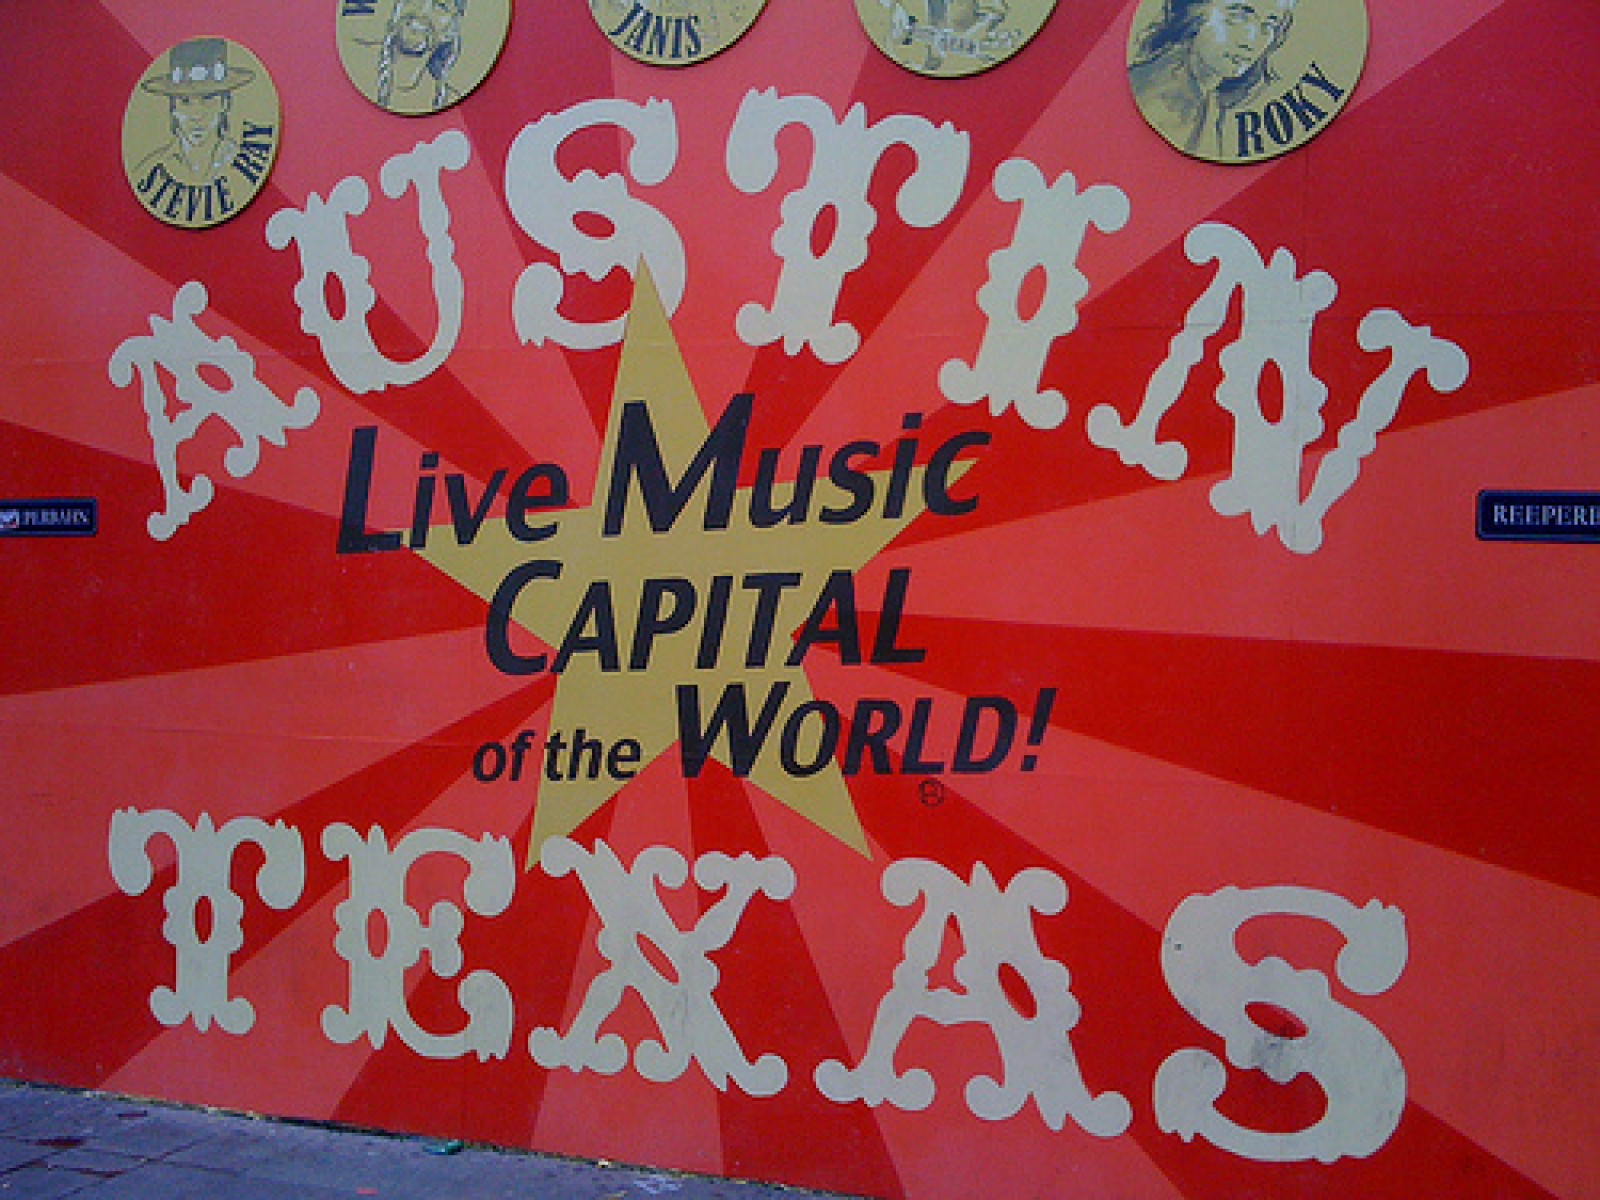 Austin, TX Best music town in the country WBEZ Chicago